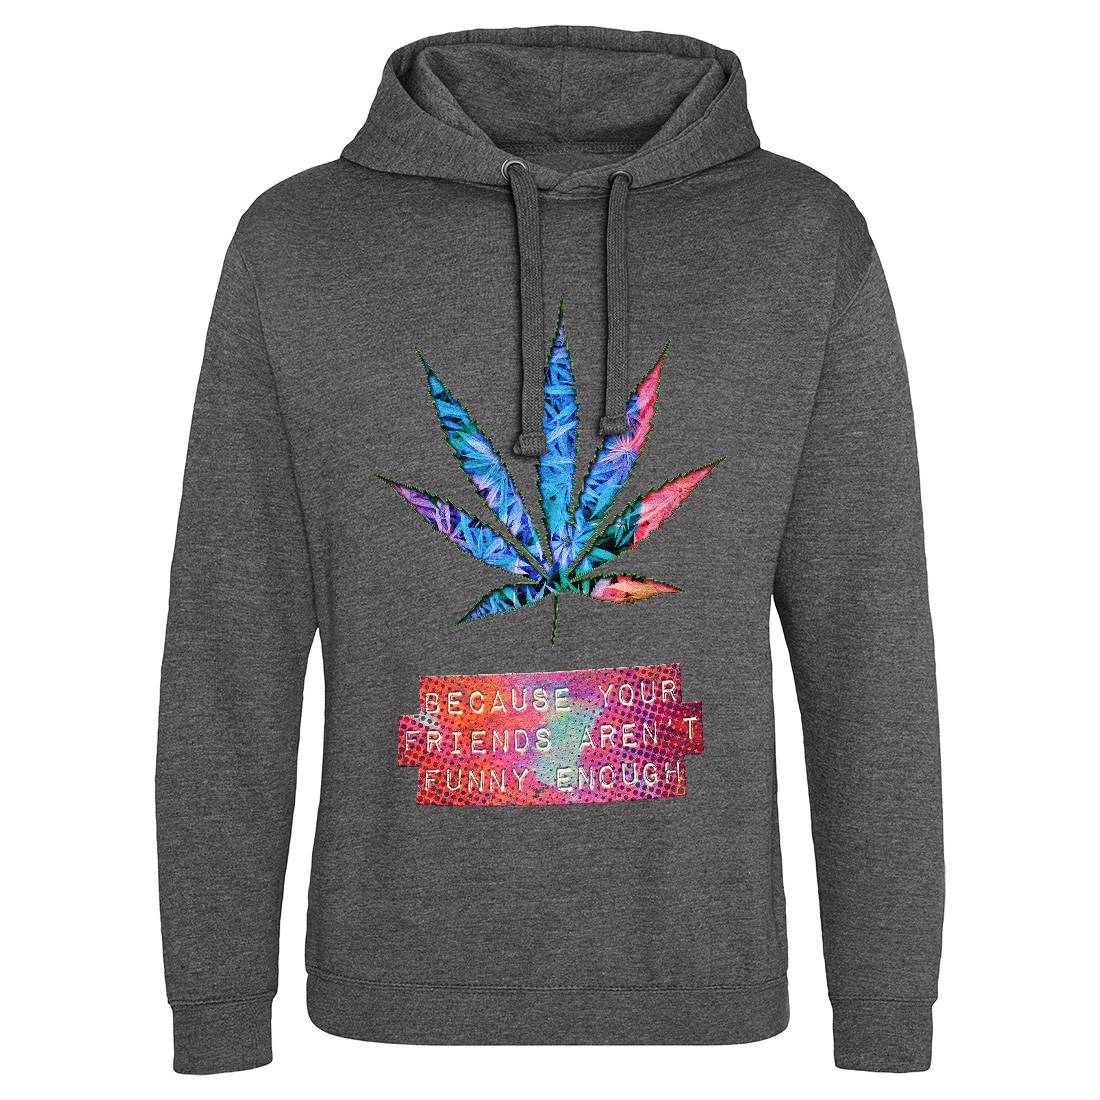 Mj Fact Mens Hoodie Without Pocket Drugs A879